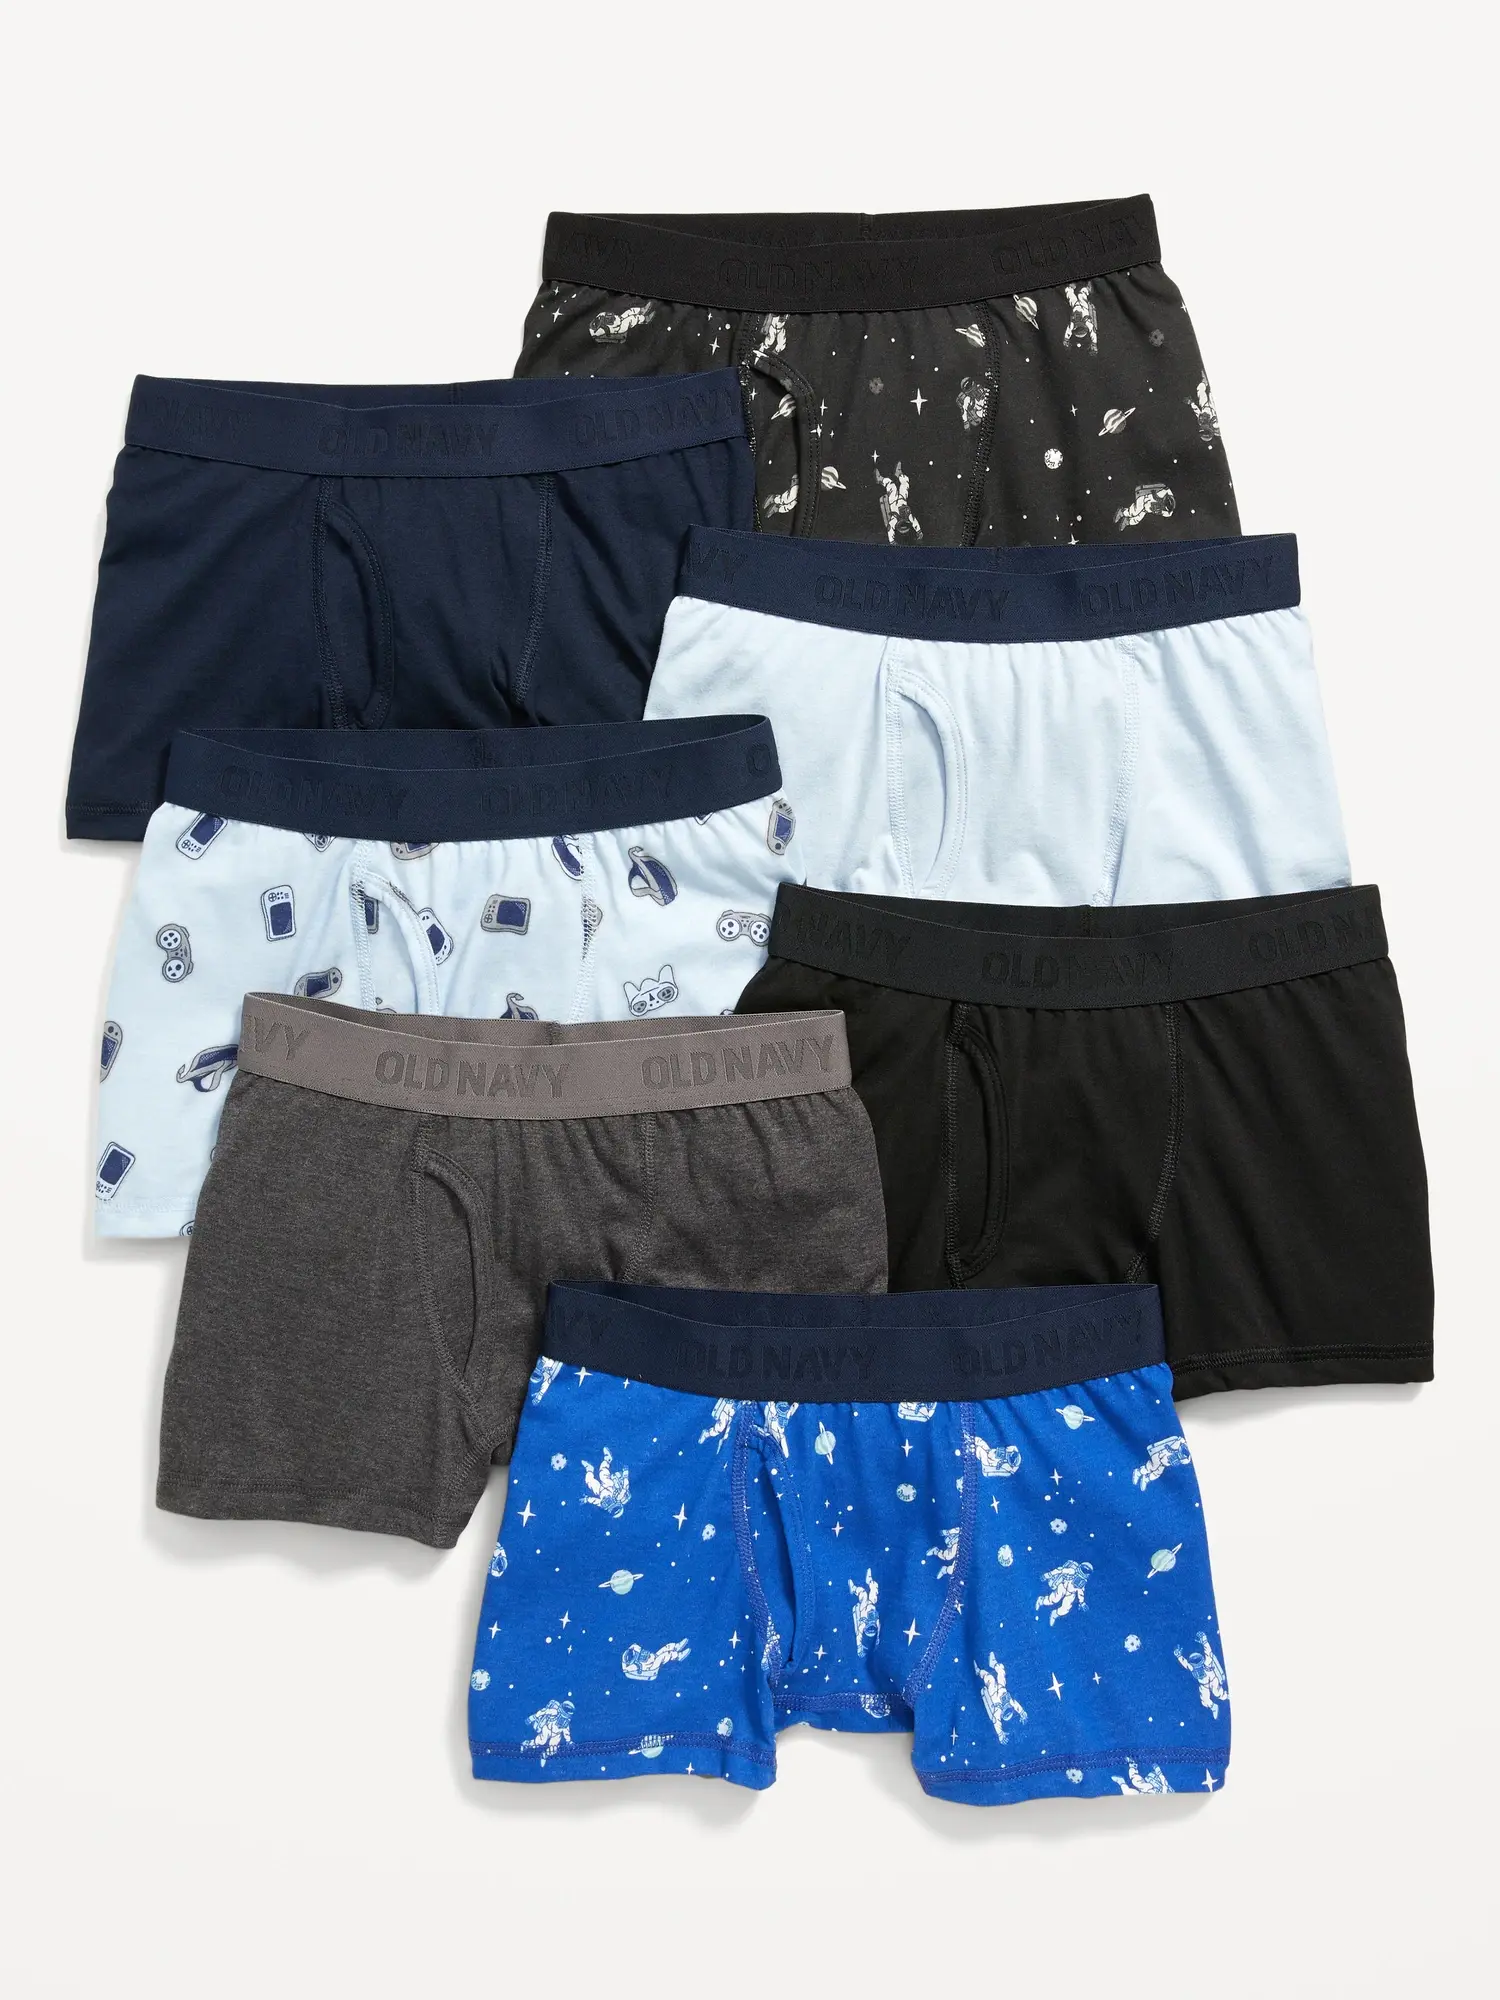 Old Navy Printed Boxer-Briefs Underwear 7-Pack for Boys multi. 1